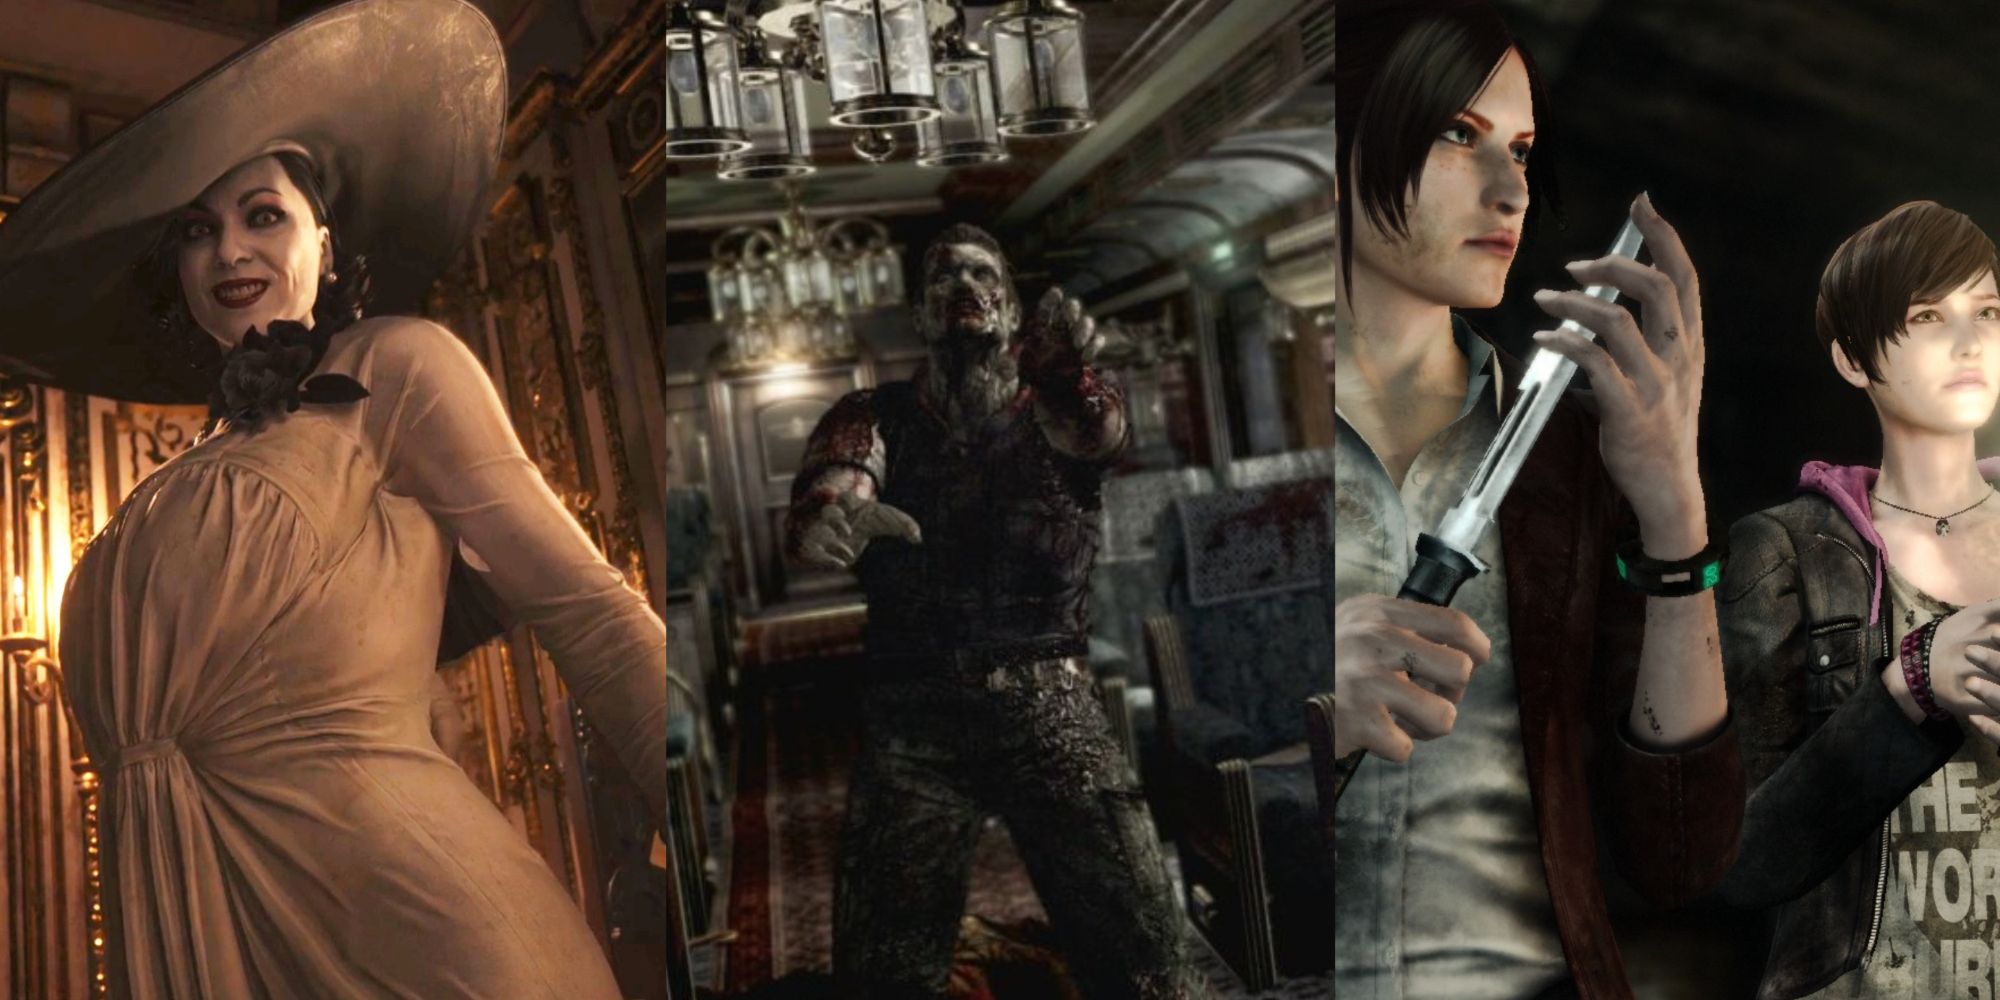 All Resident Evil Games Available On Switch